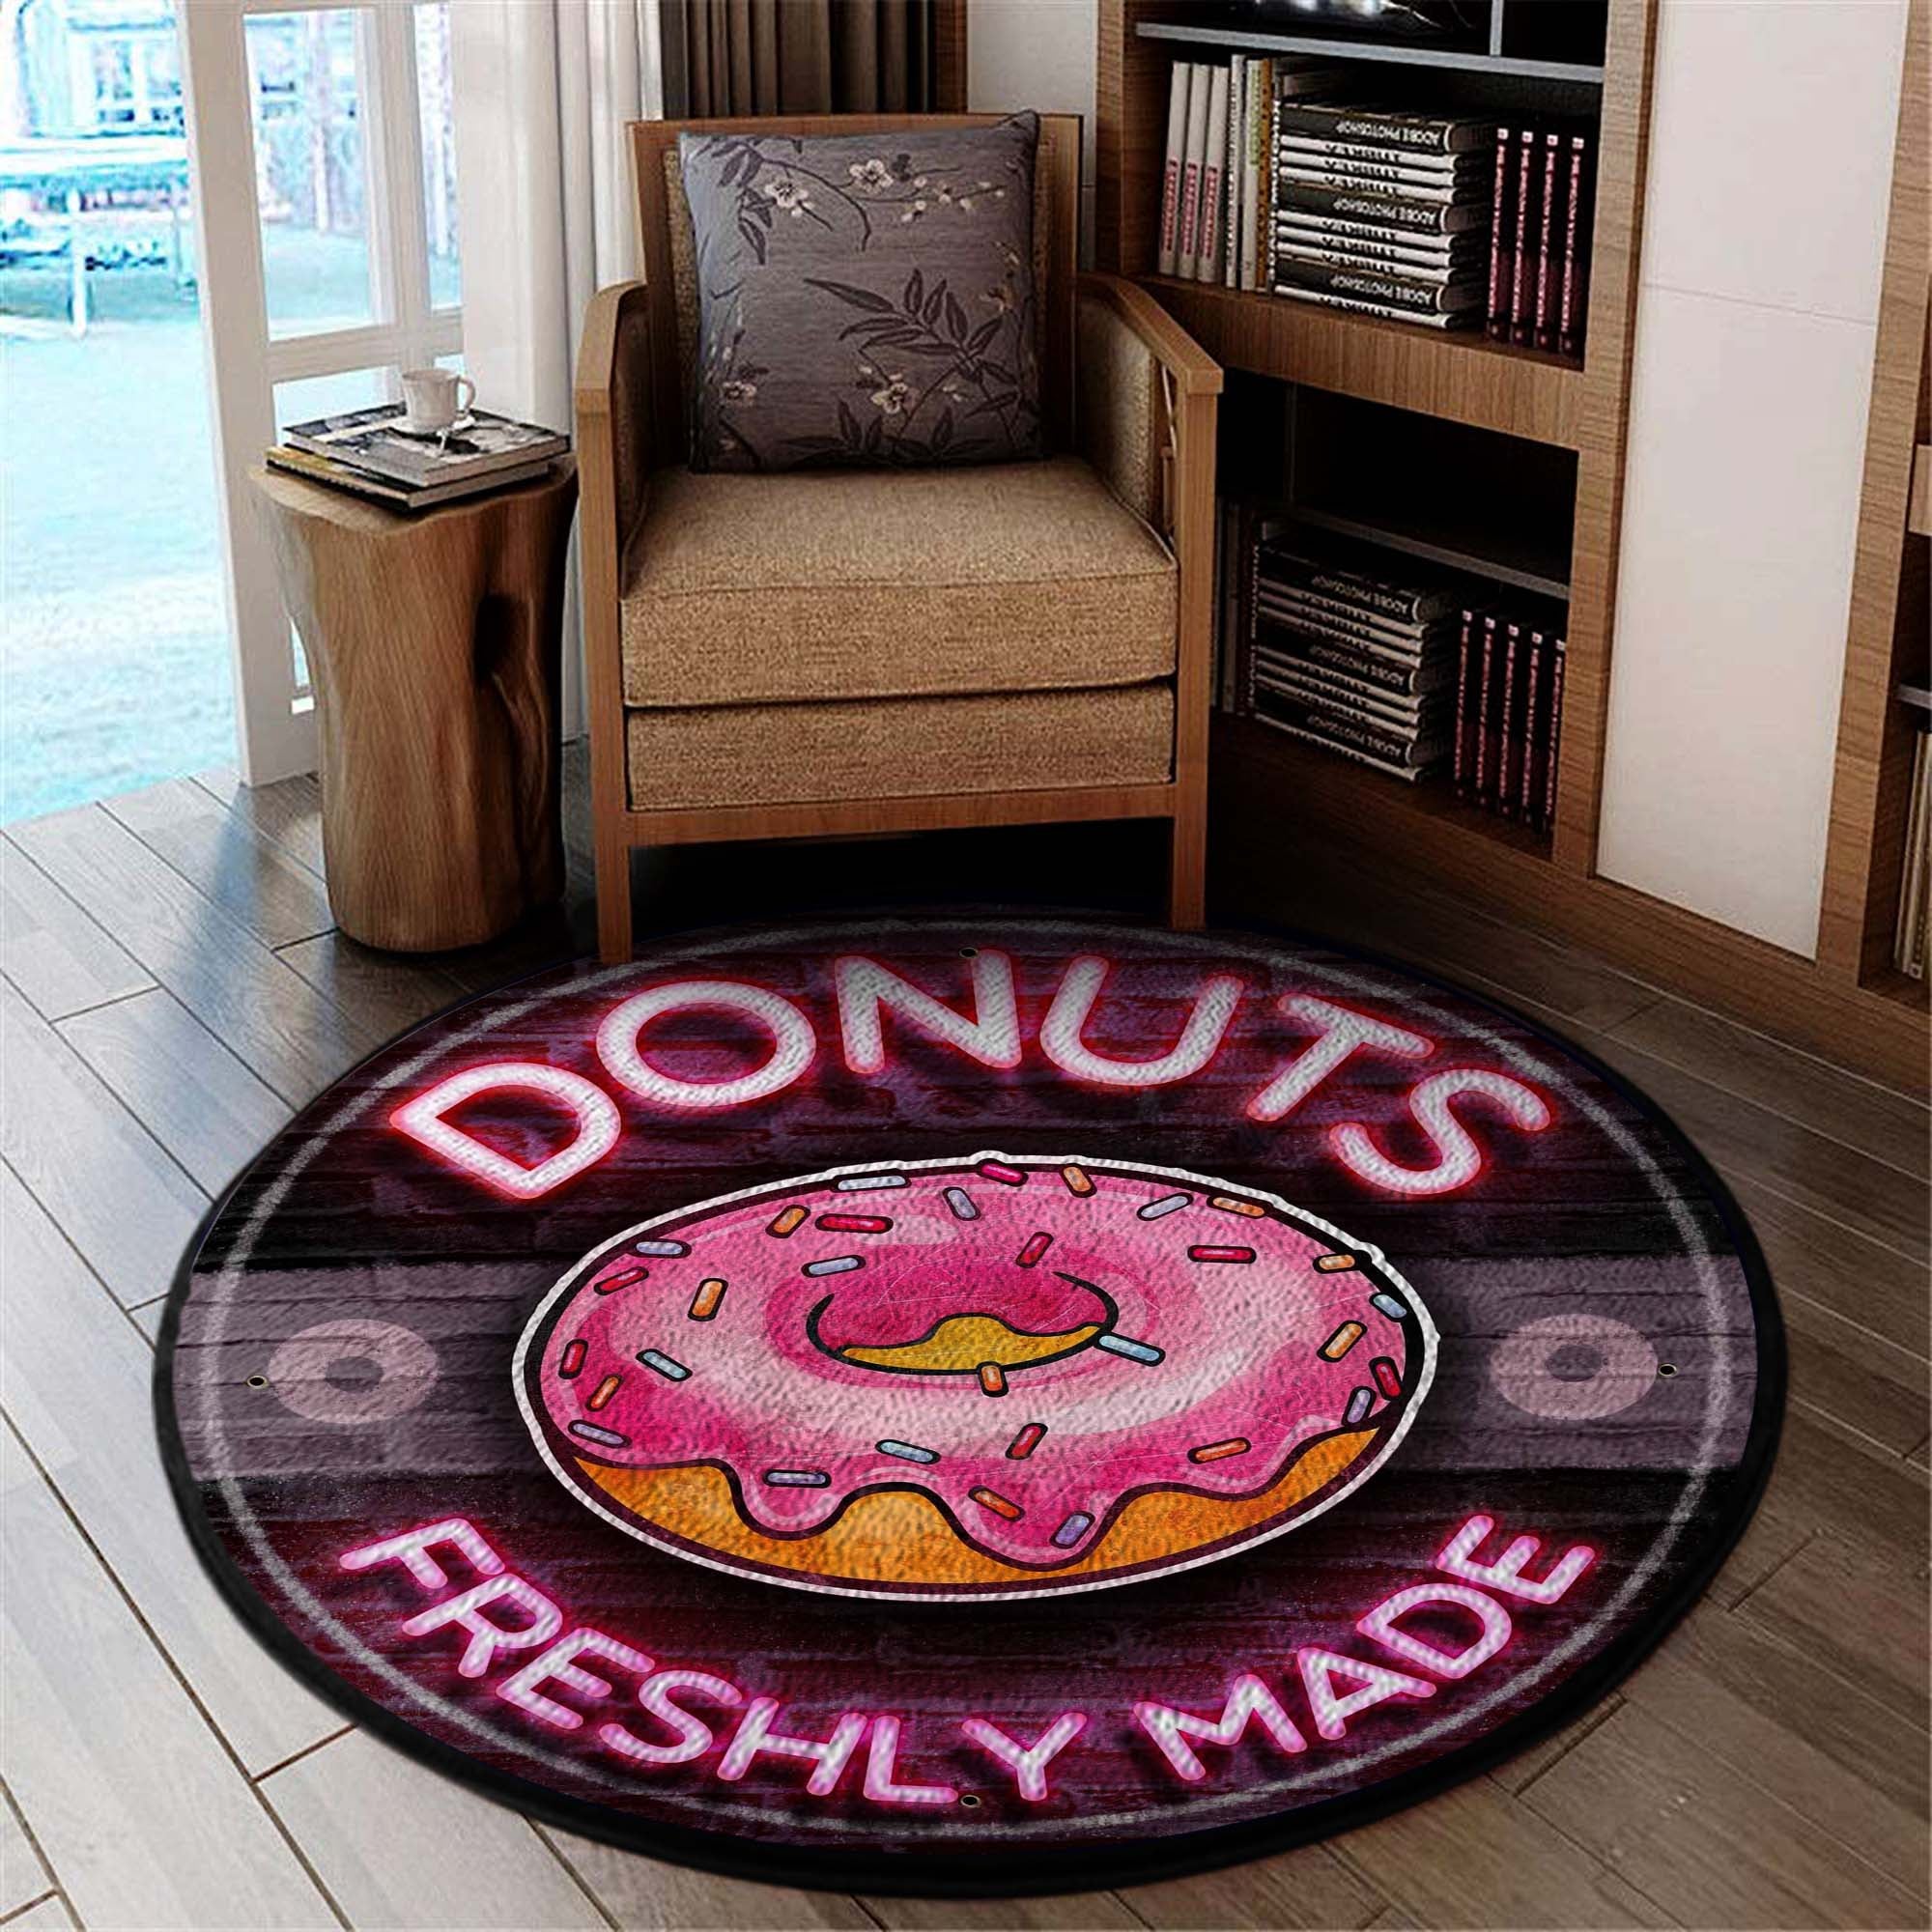 Donuts Freshly Made Round Mat 06364